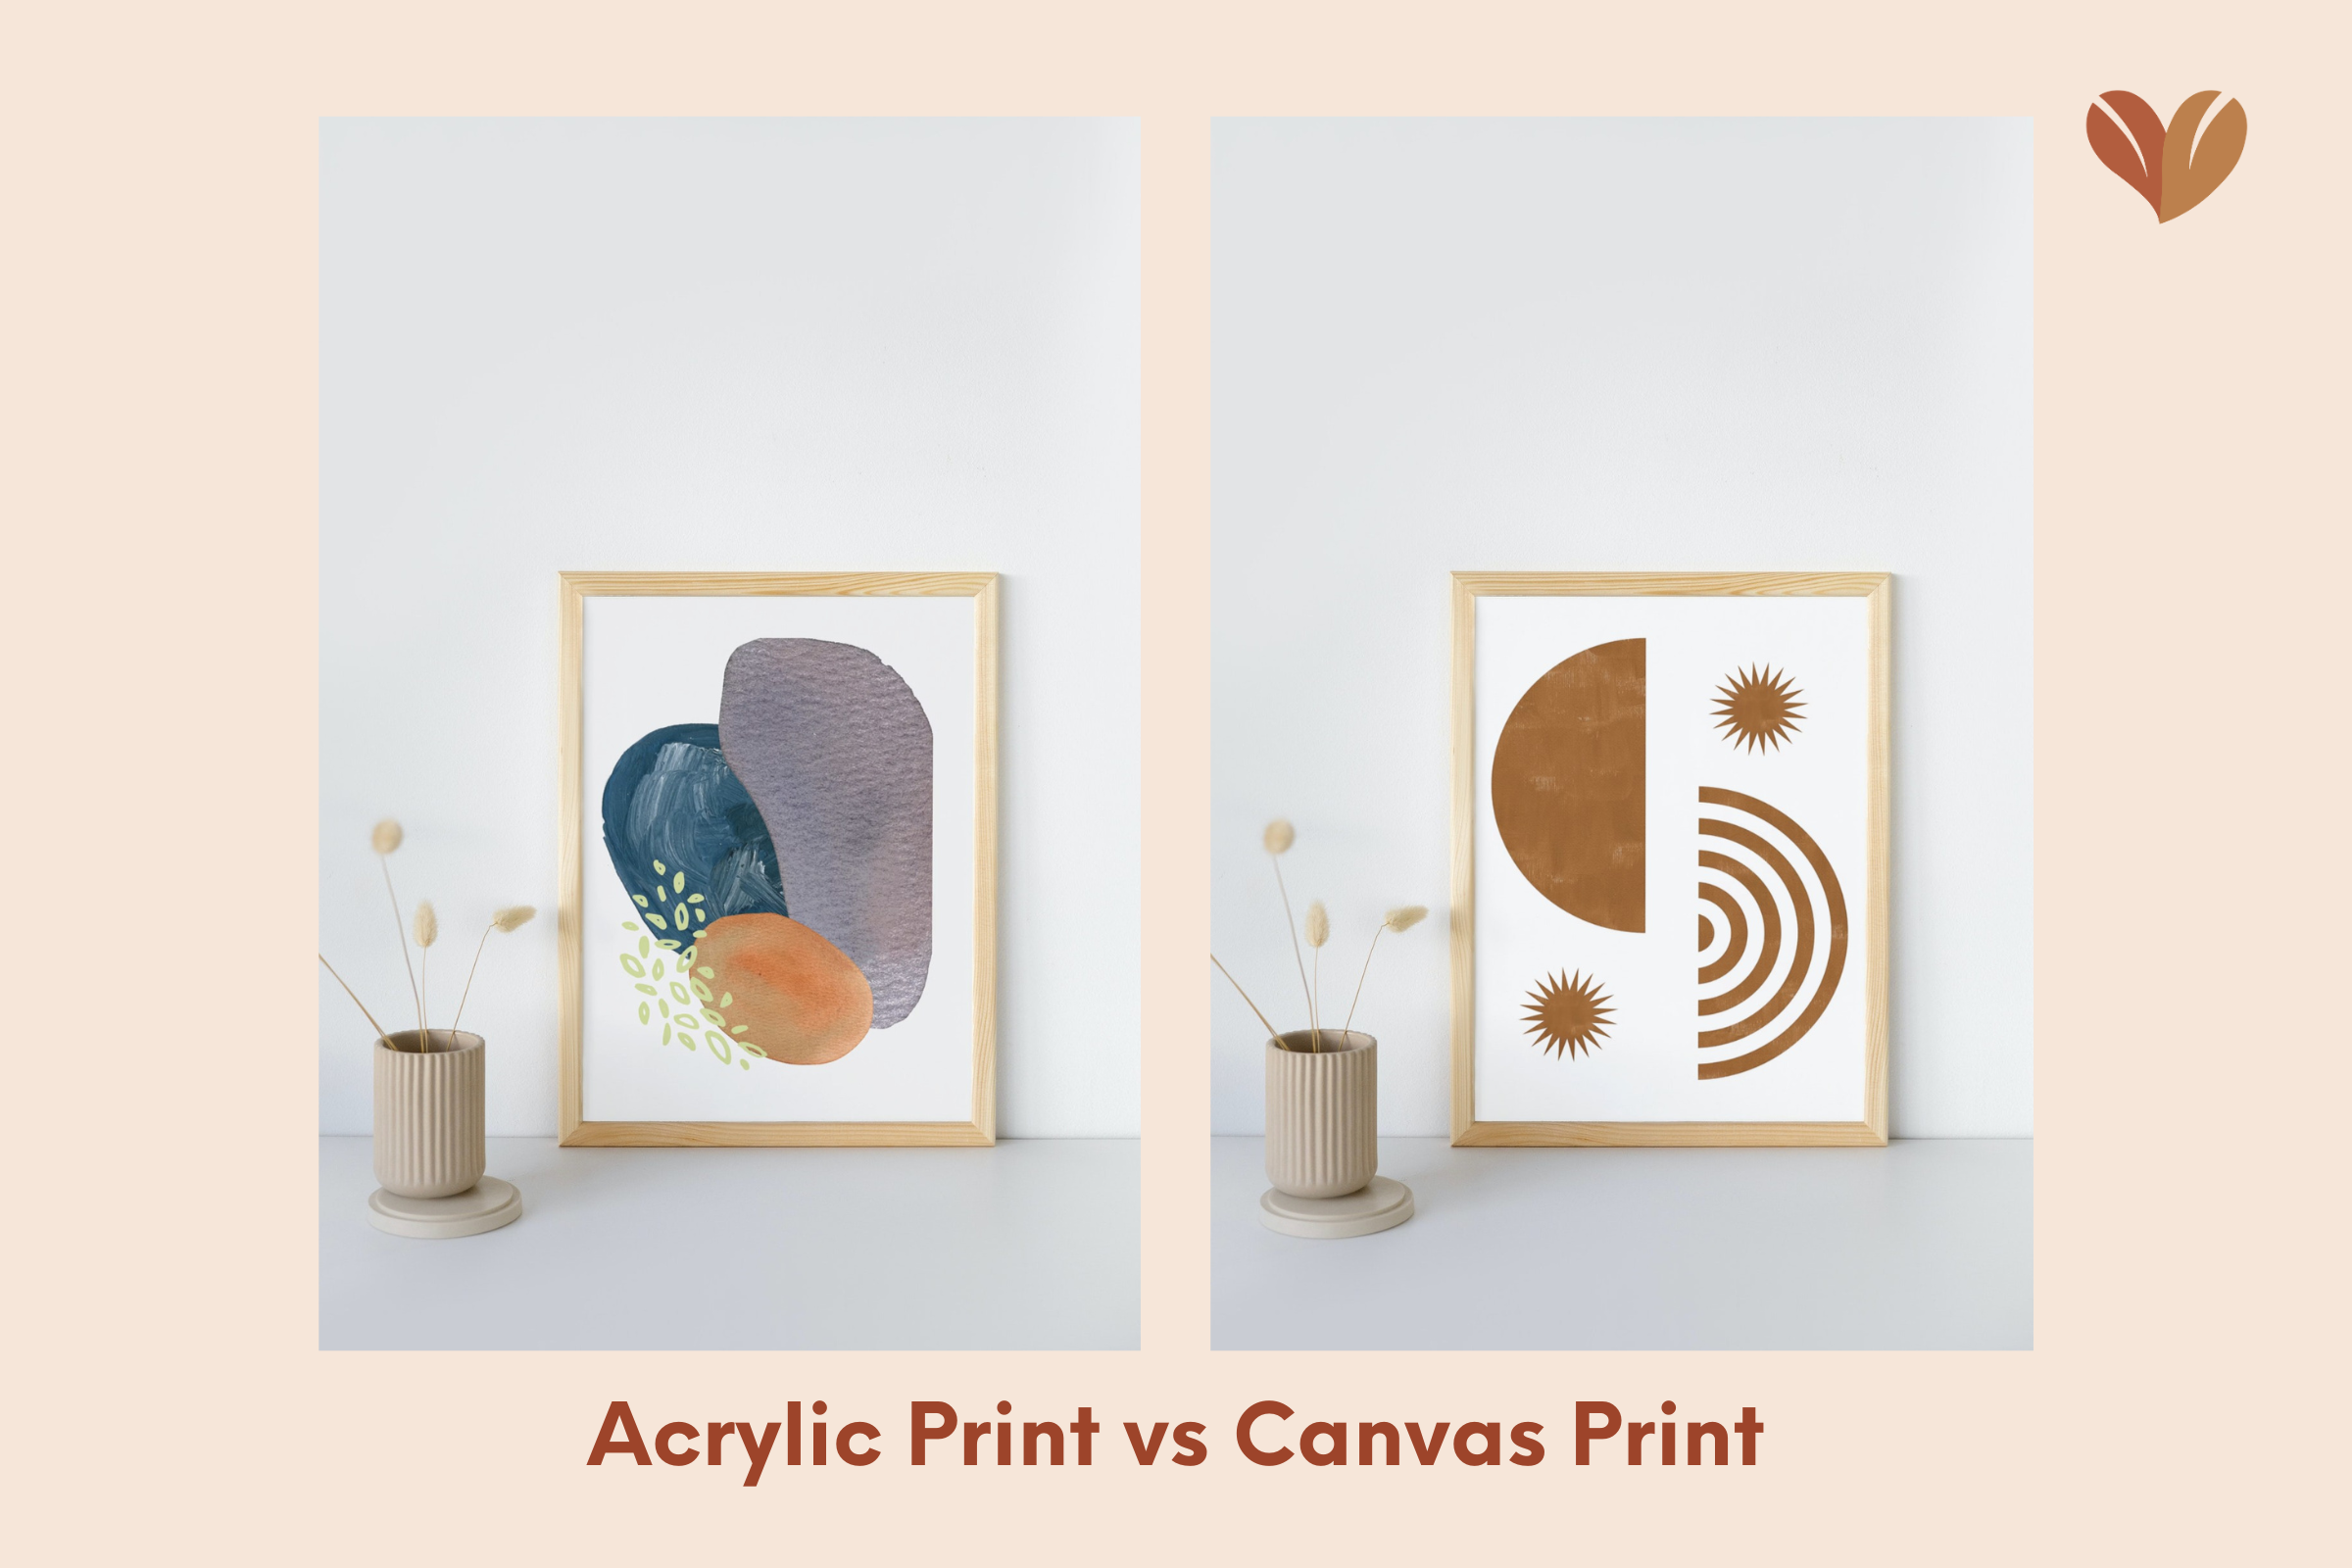 Comparing the stunning clarity and depth of acrylic prints versus the timeless appeal of canvas prints